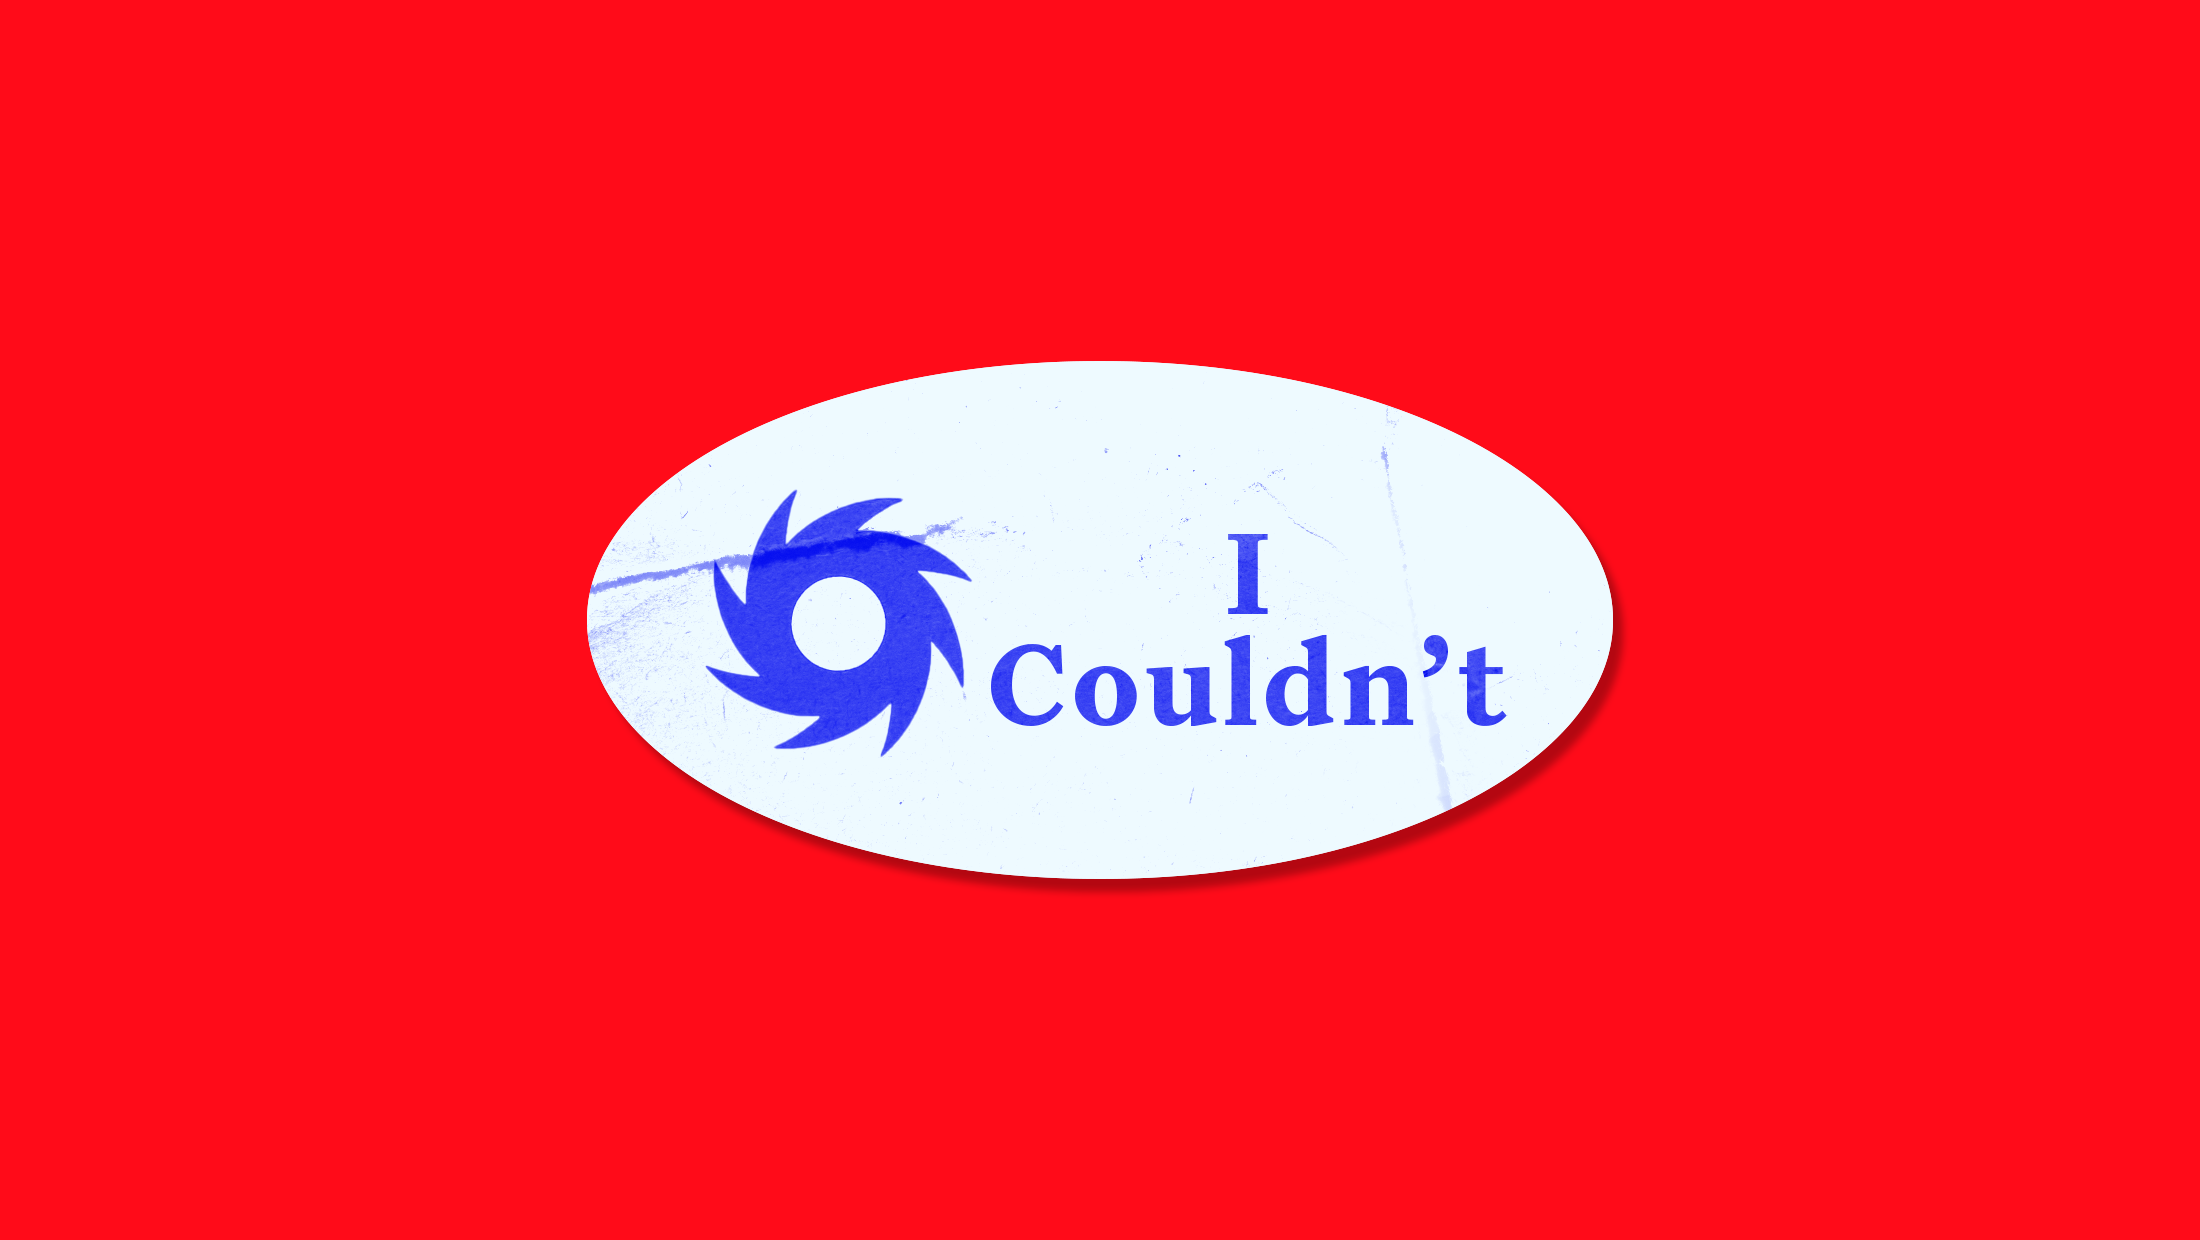 A sticker that has a hurricane symbol and says "I Couldn't" intsead of "I Voted" on a red background.